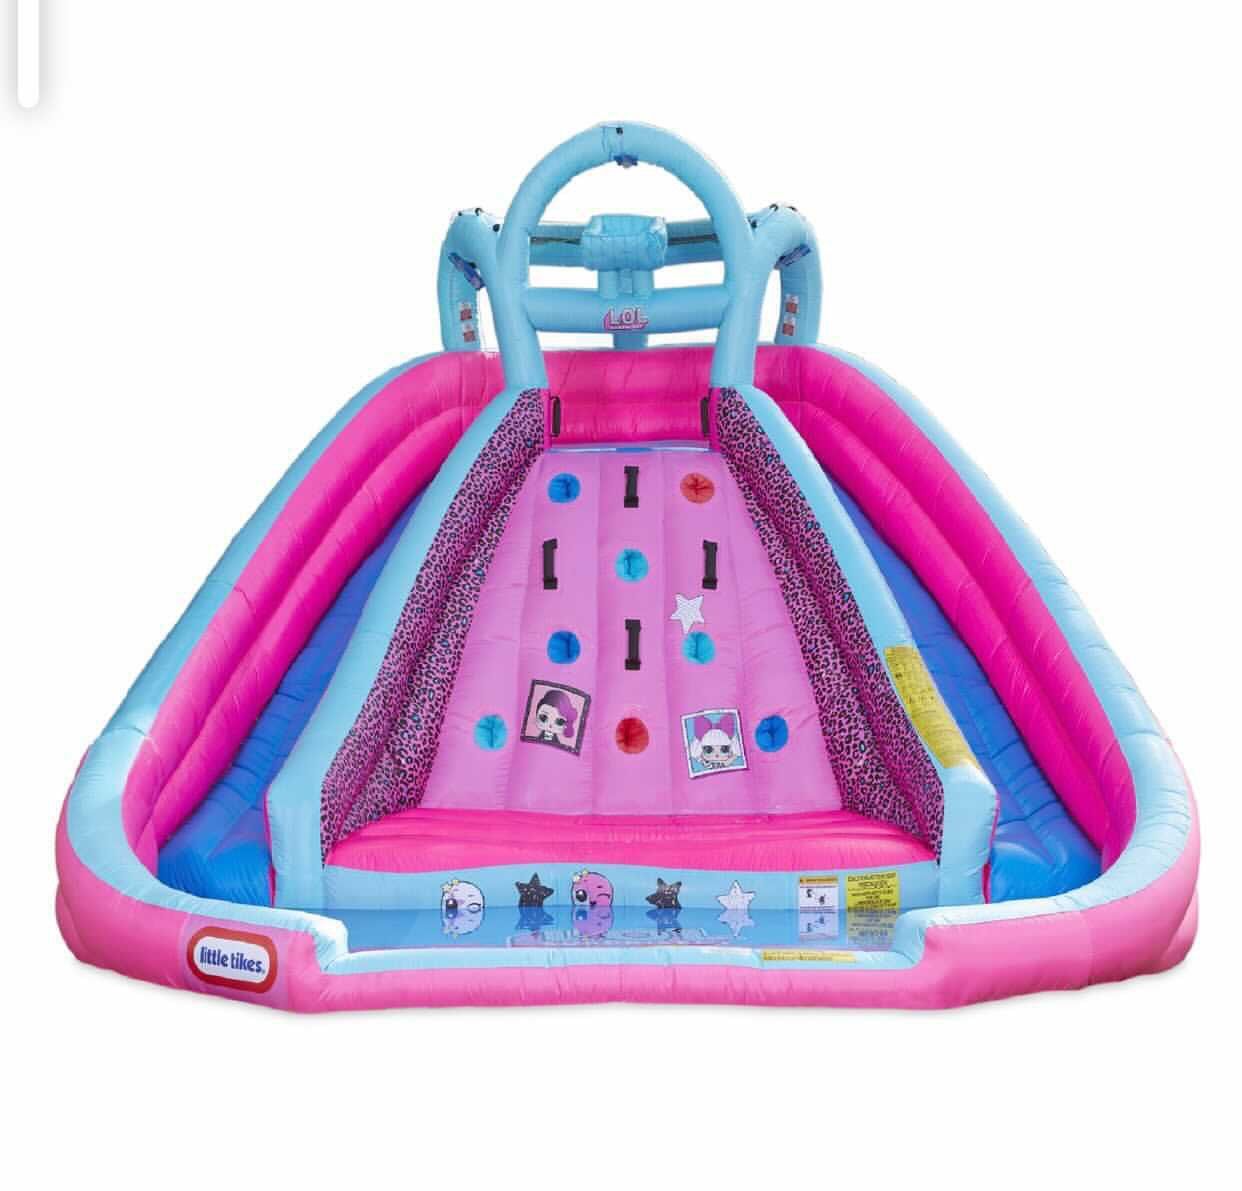 LOL Surprise Inflatable WaterSlide Bouncer Used like New